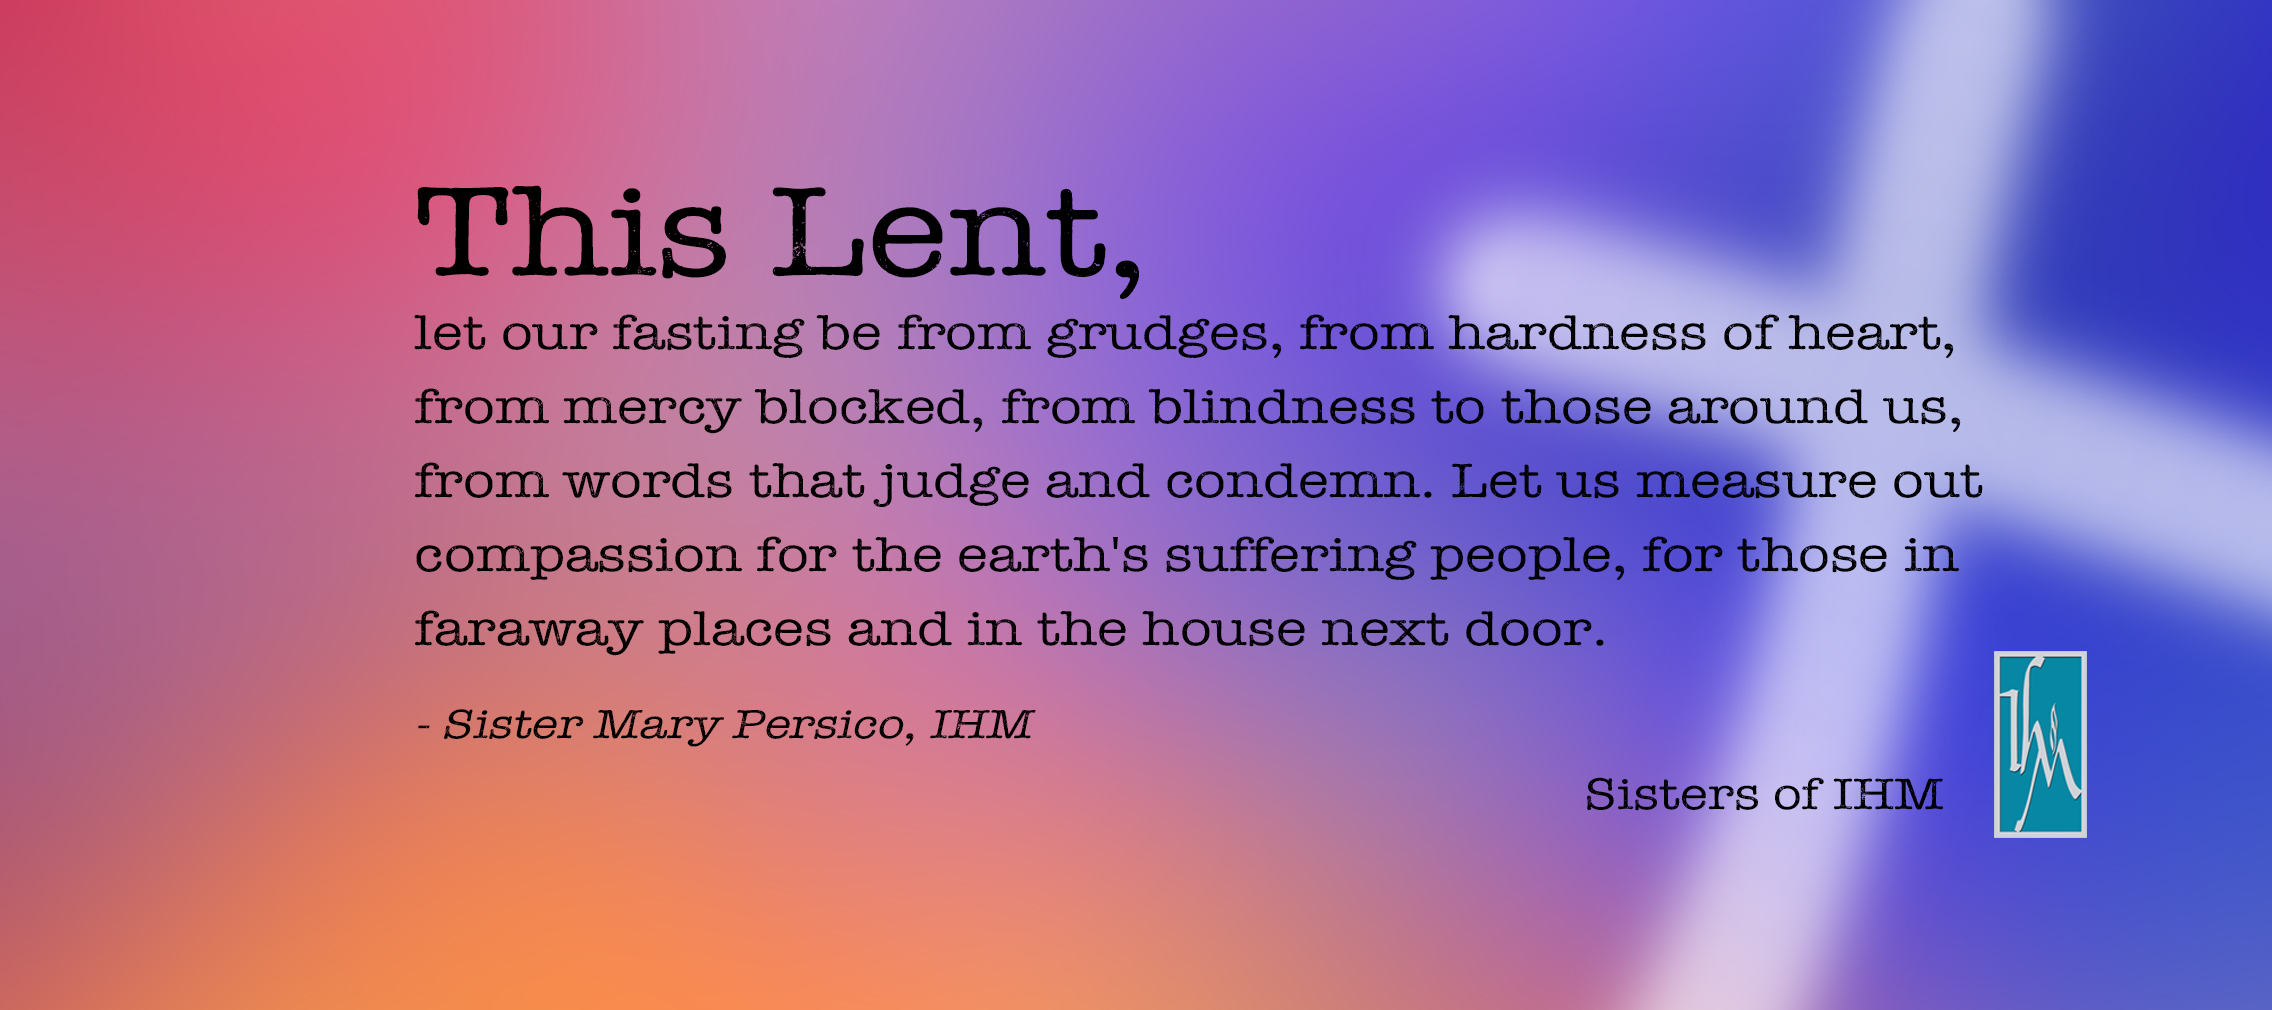 This Lent let our fasting be from grudges...